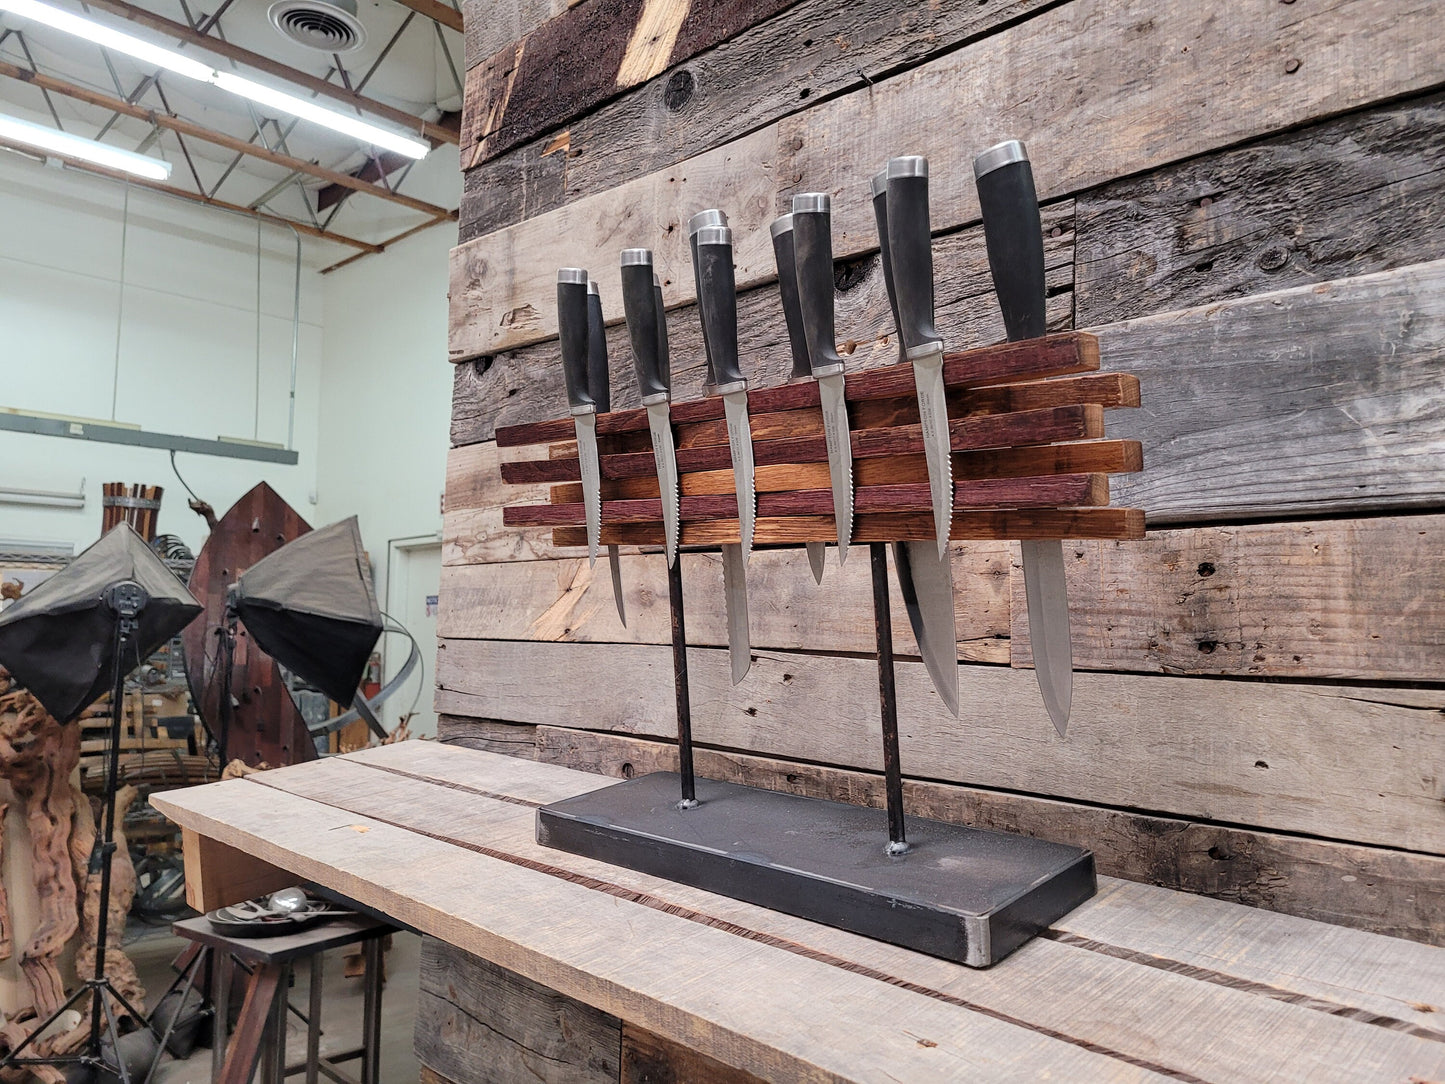 Wine Barrel Magnetic Knife Rack - Osto 2 - Made from retired Napa wine barrels. 100% Recycled!